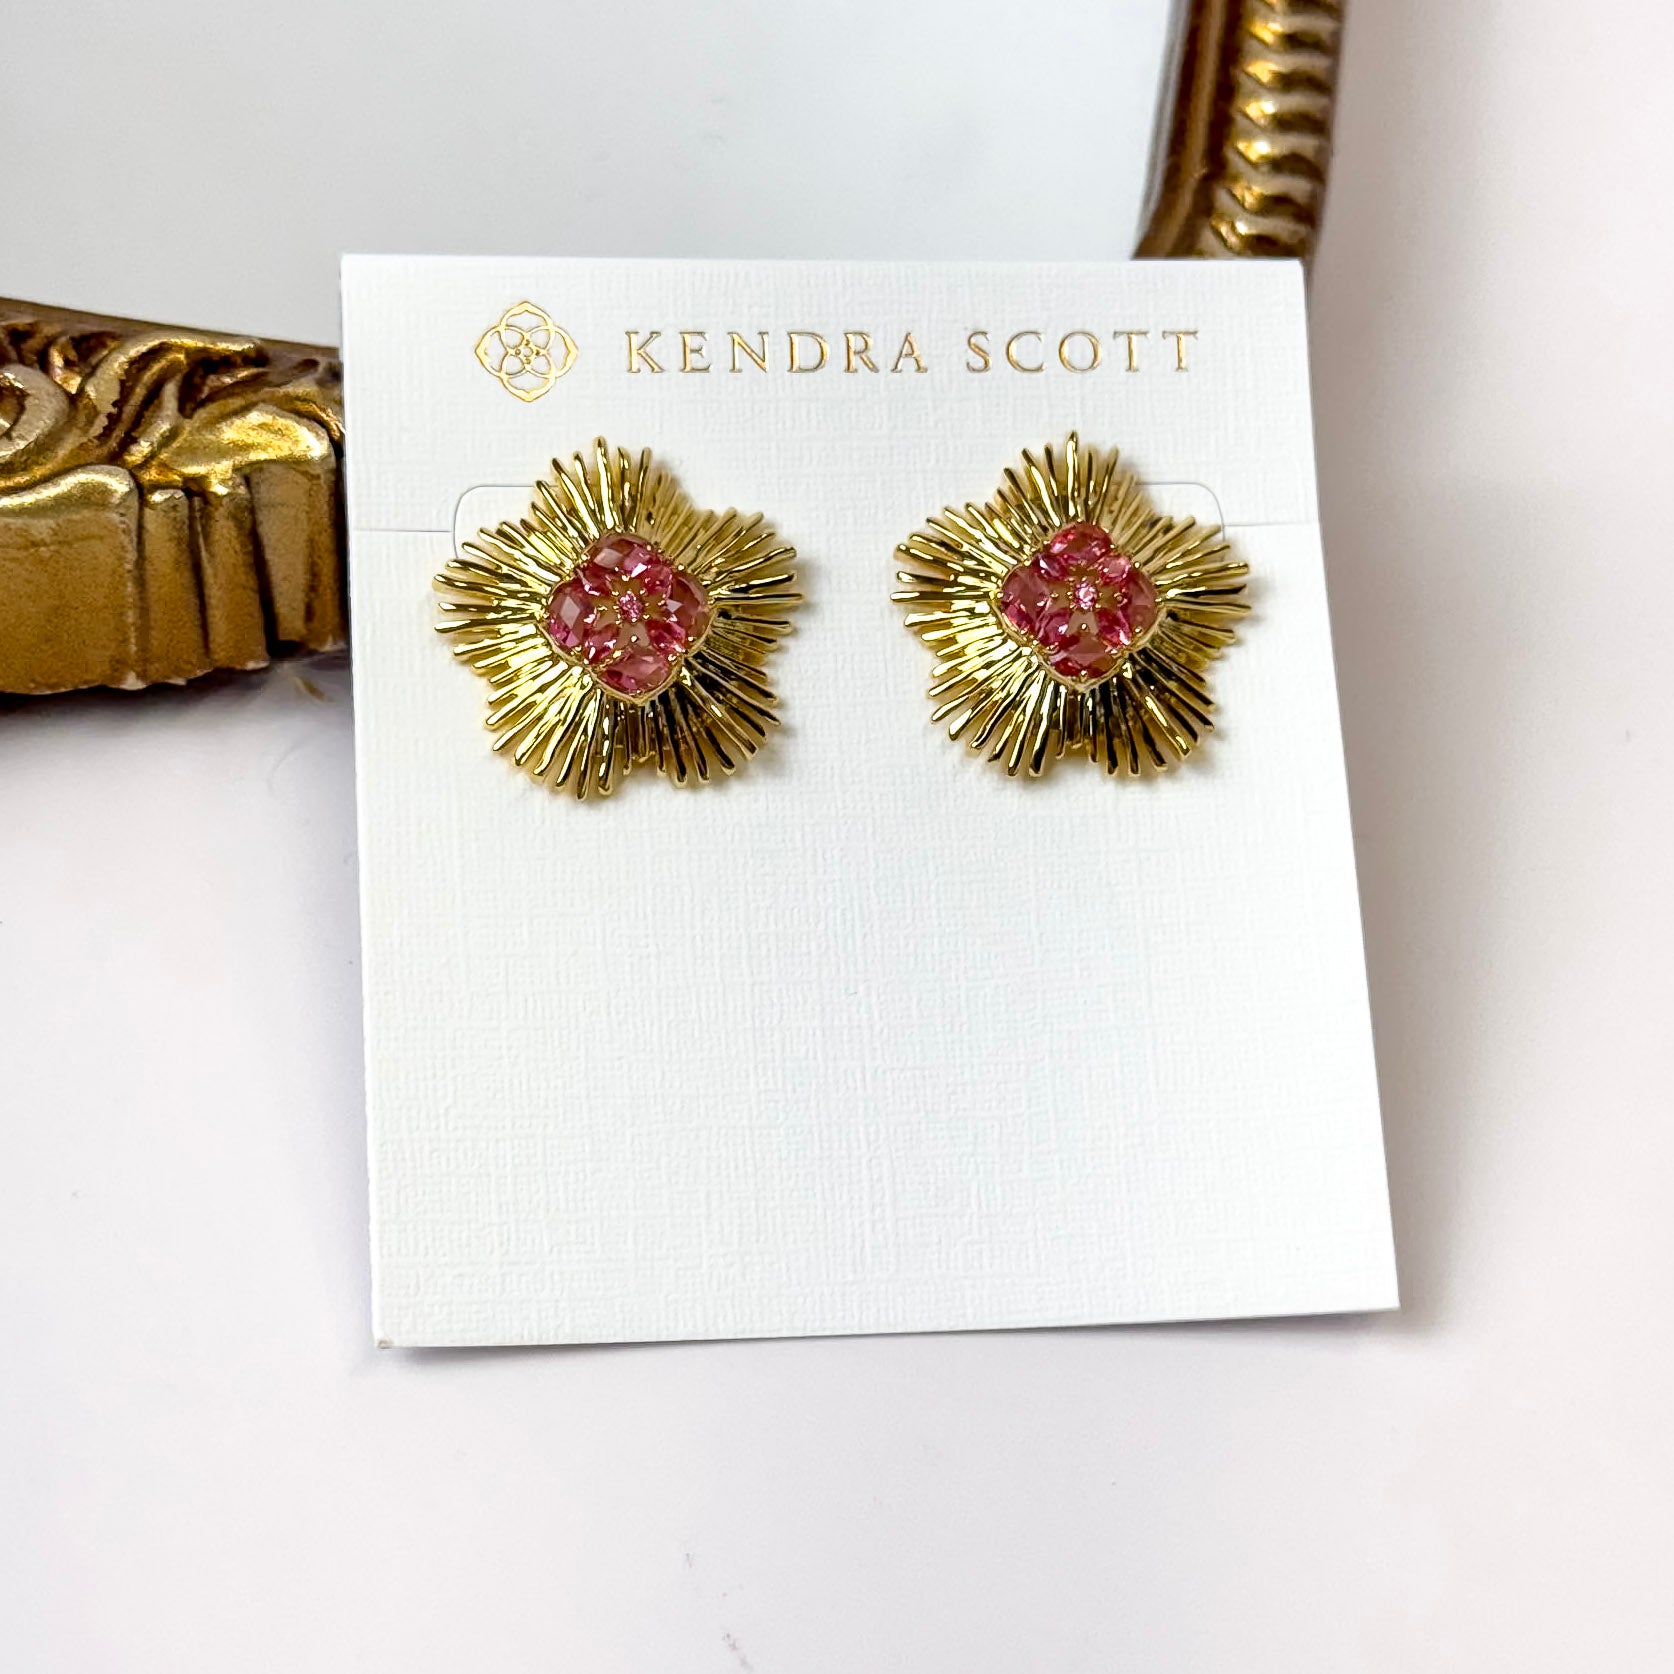 Kendra Scott | Dira Gold Crystal Statement Stud Earrings in Pink Mix - Giddy Up Glamour Boutique